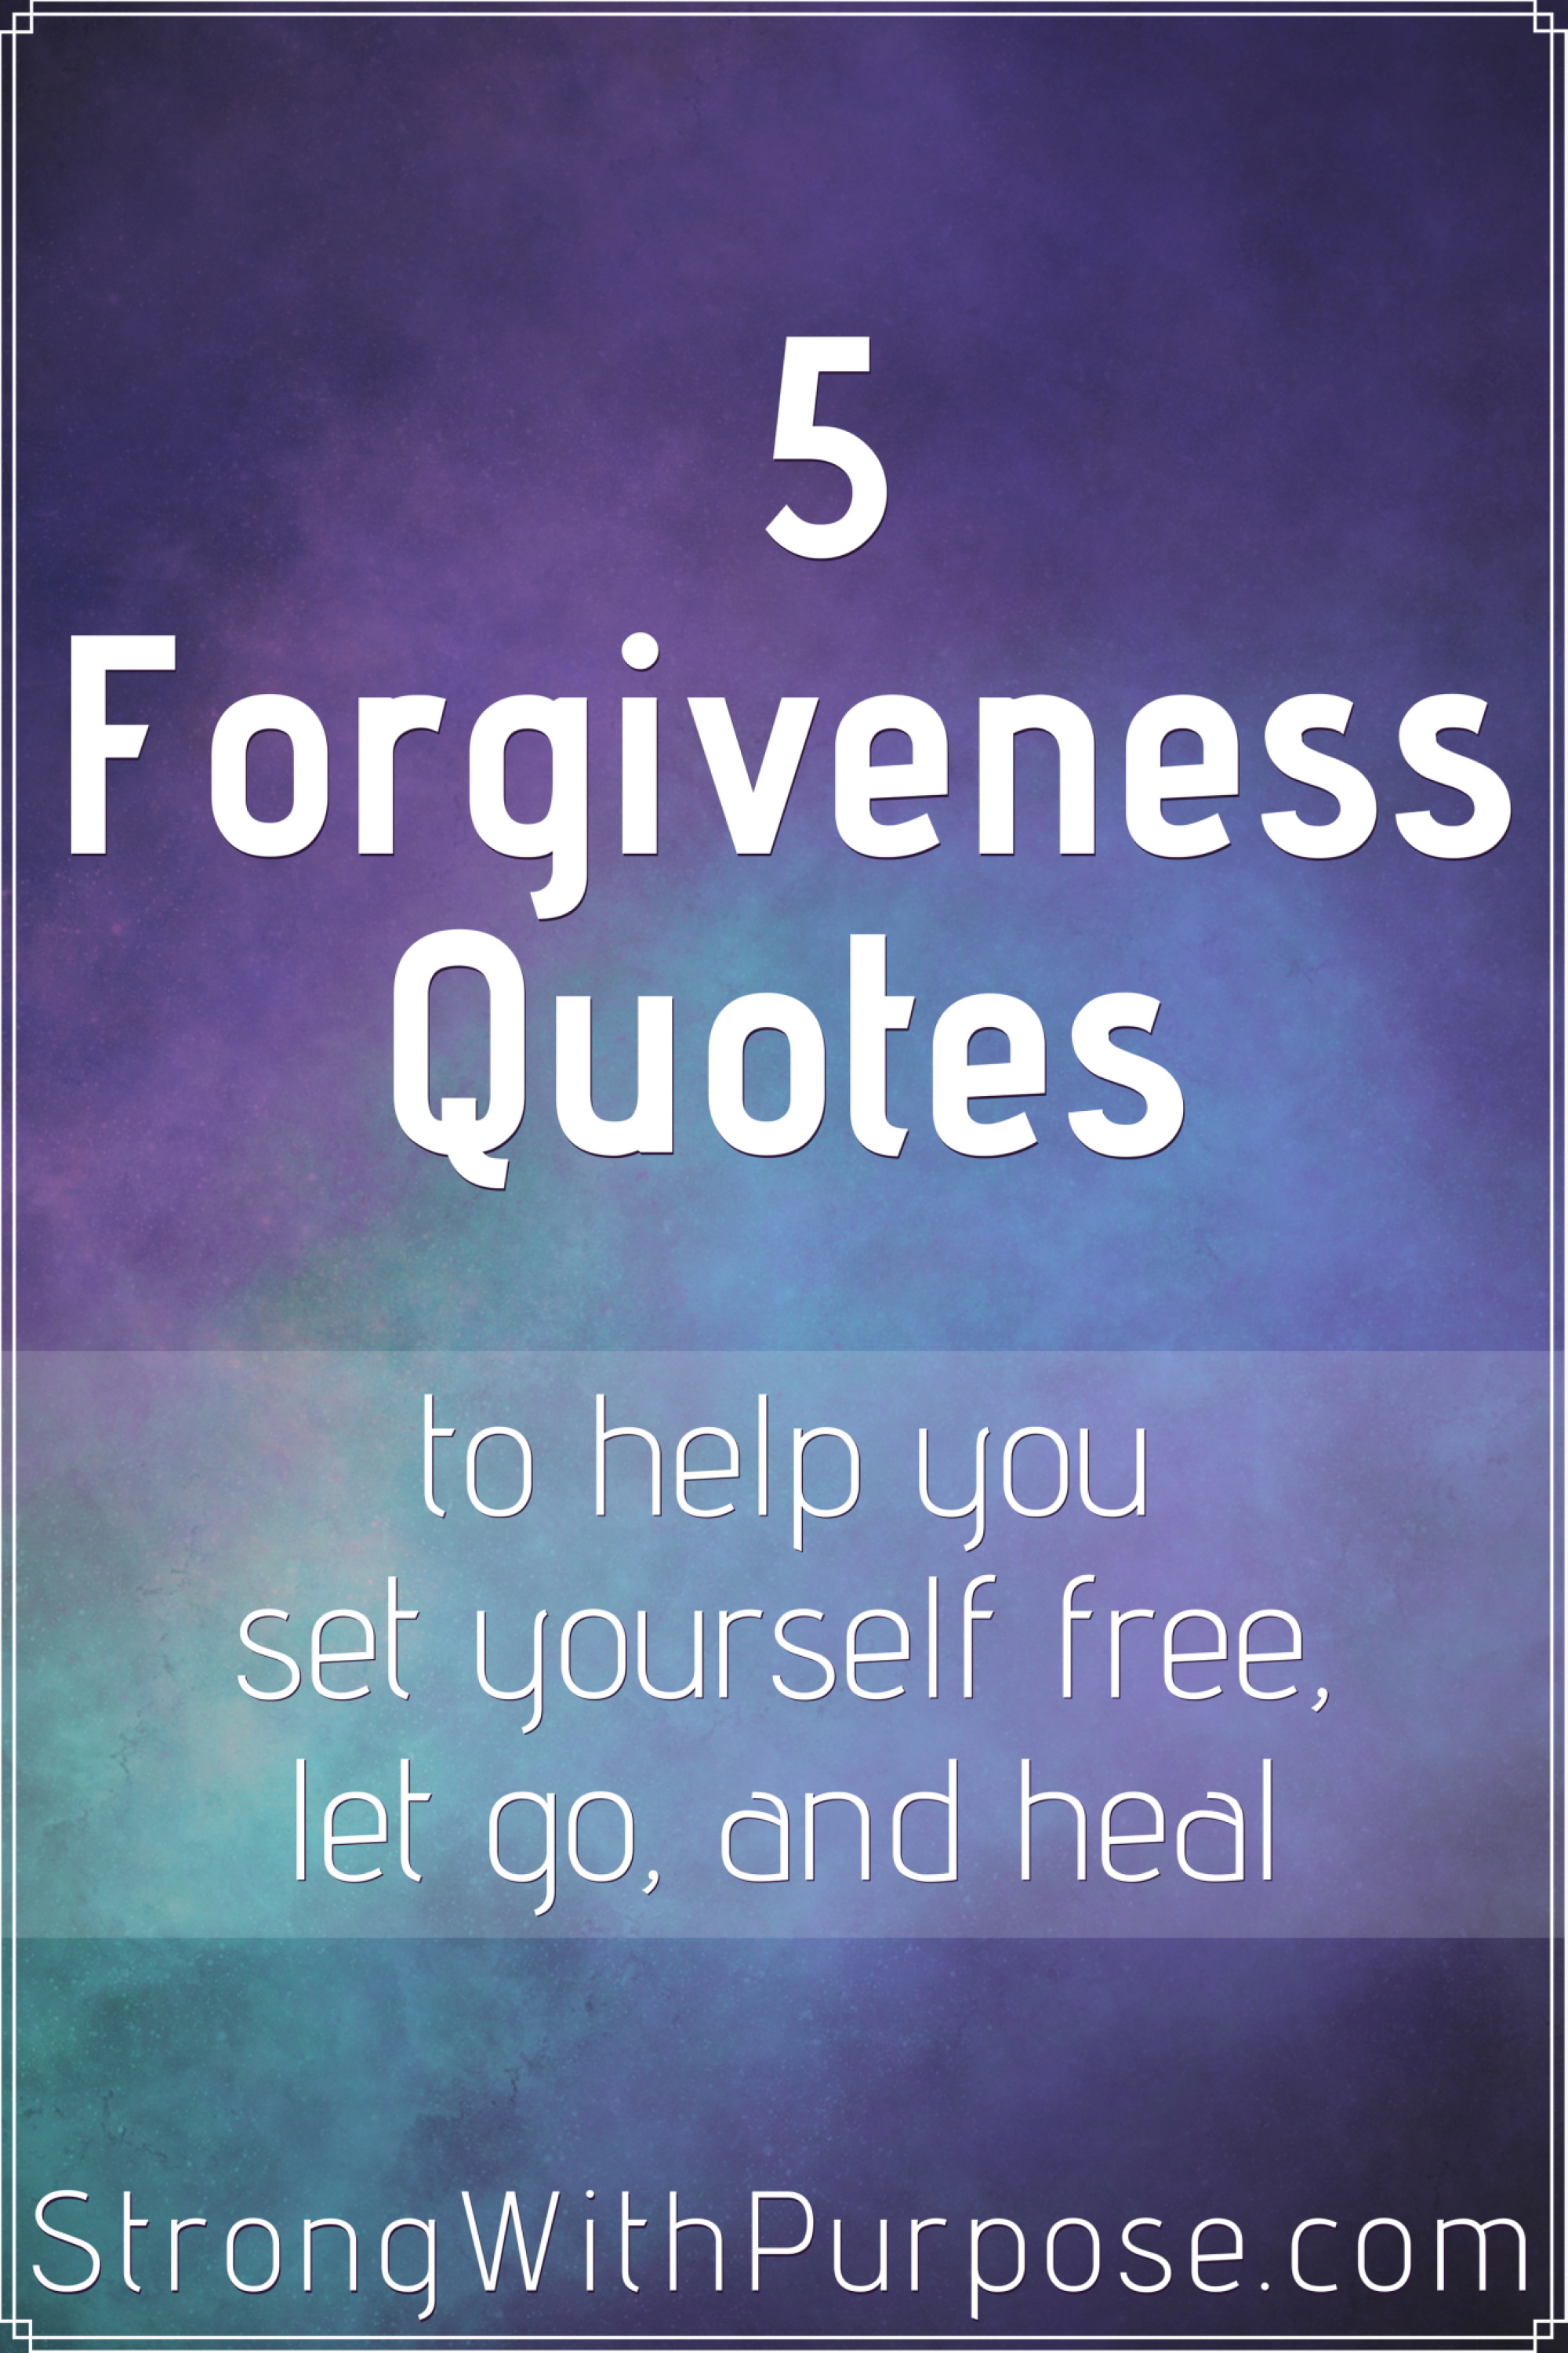 5 Forgiveness Quotes To Help You Set Yourself Free, Let Go, and Heal Strong with Purpose